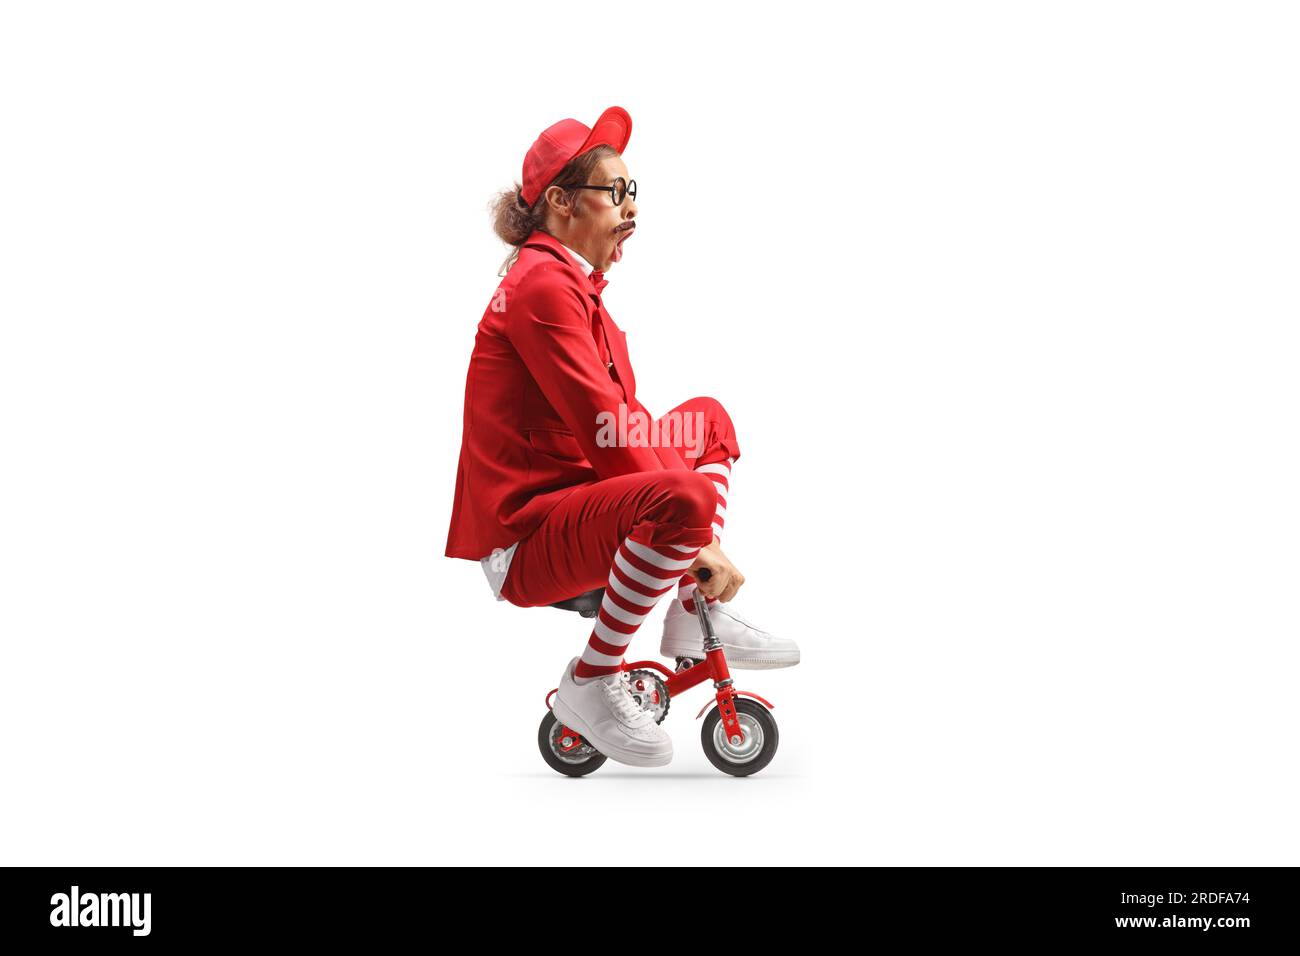 Comedian riding a small red bike isolated on white background Stock Photo